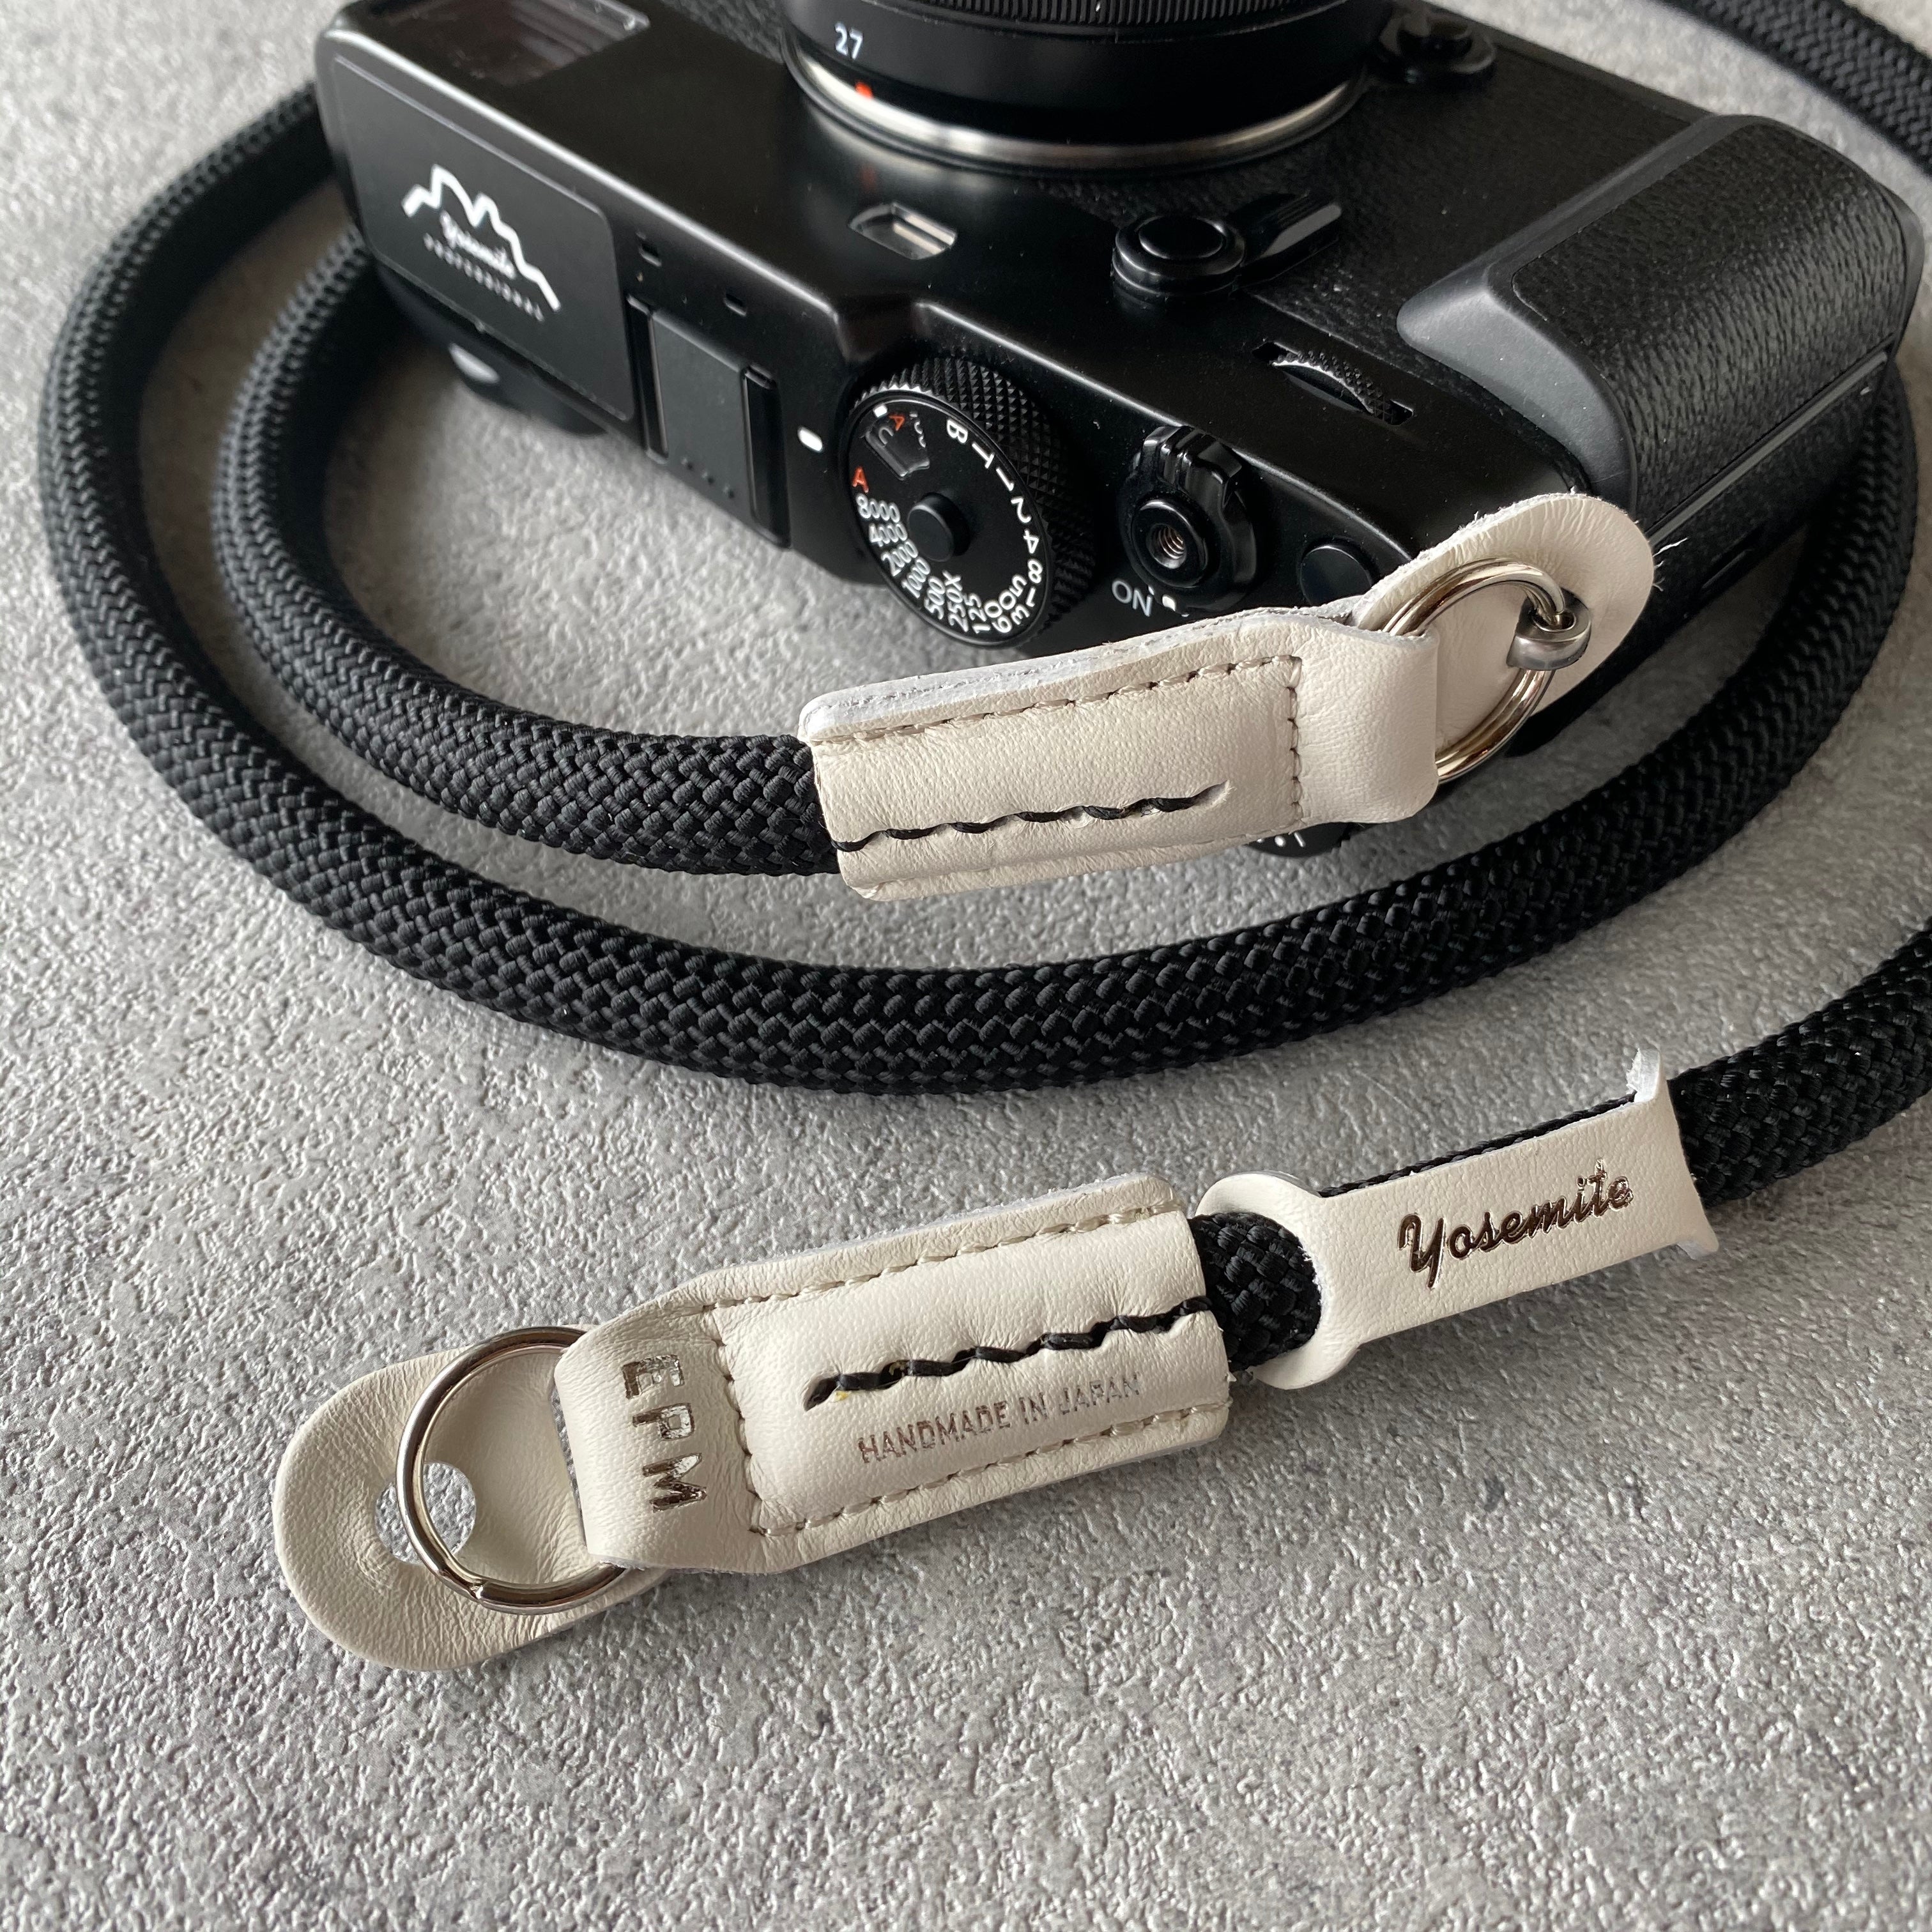 Camera Strap – Extended Photographic Material